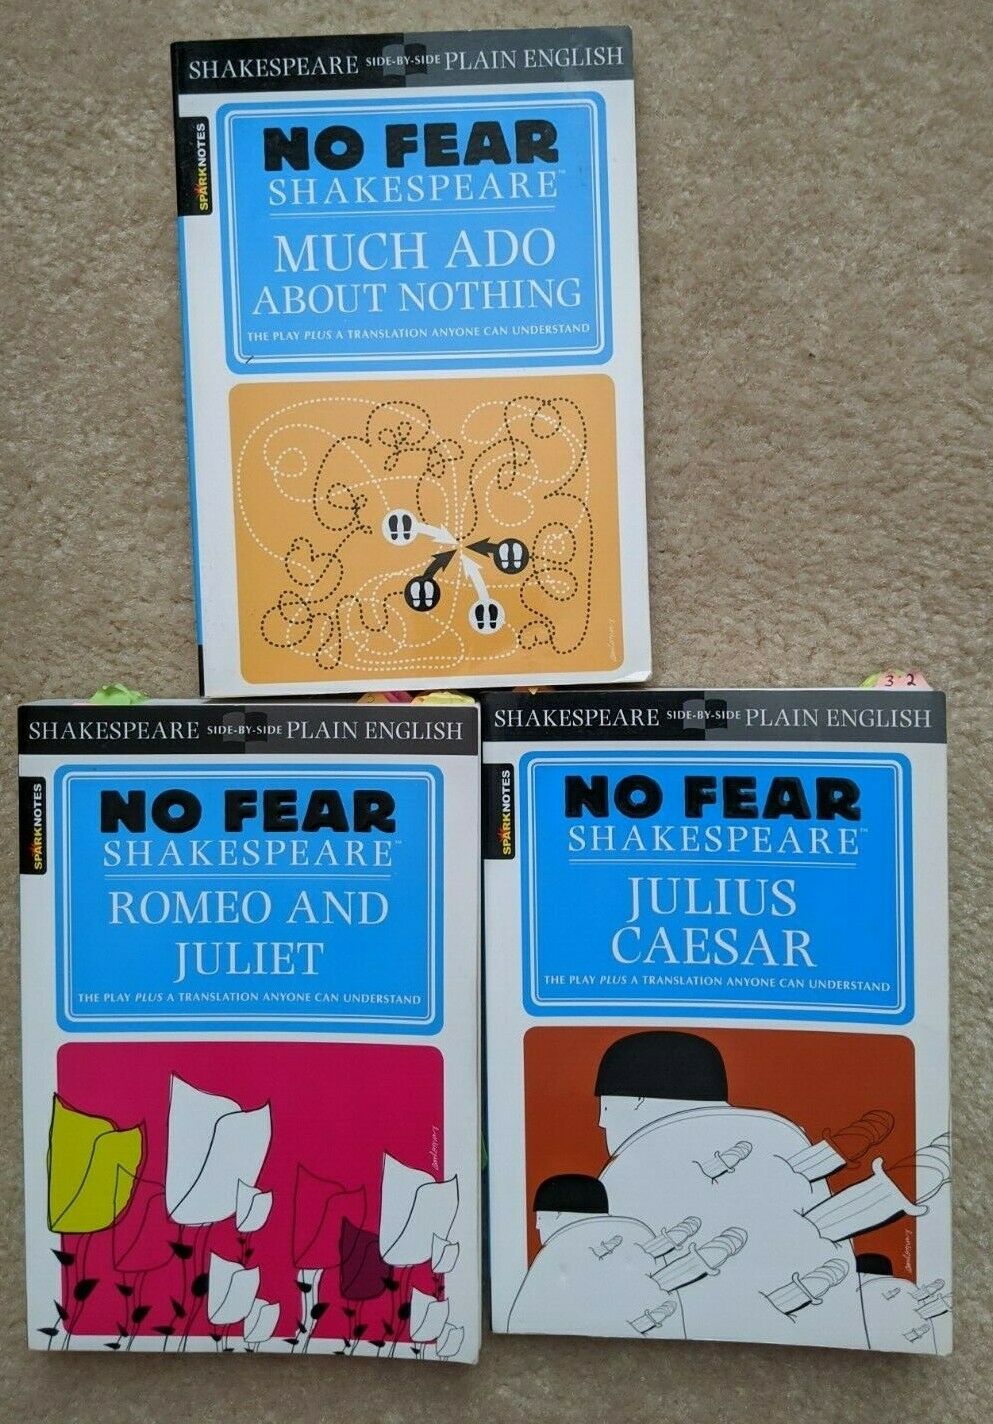 No Fear Shakespeare - Julius Caesar, Romeo and Juliet, Much Ado About Nothing - Perfume Gallery